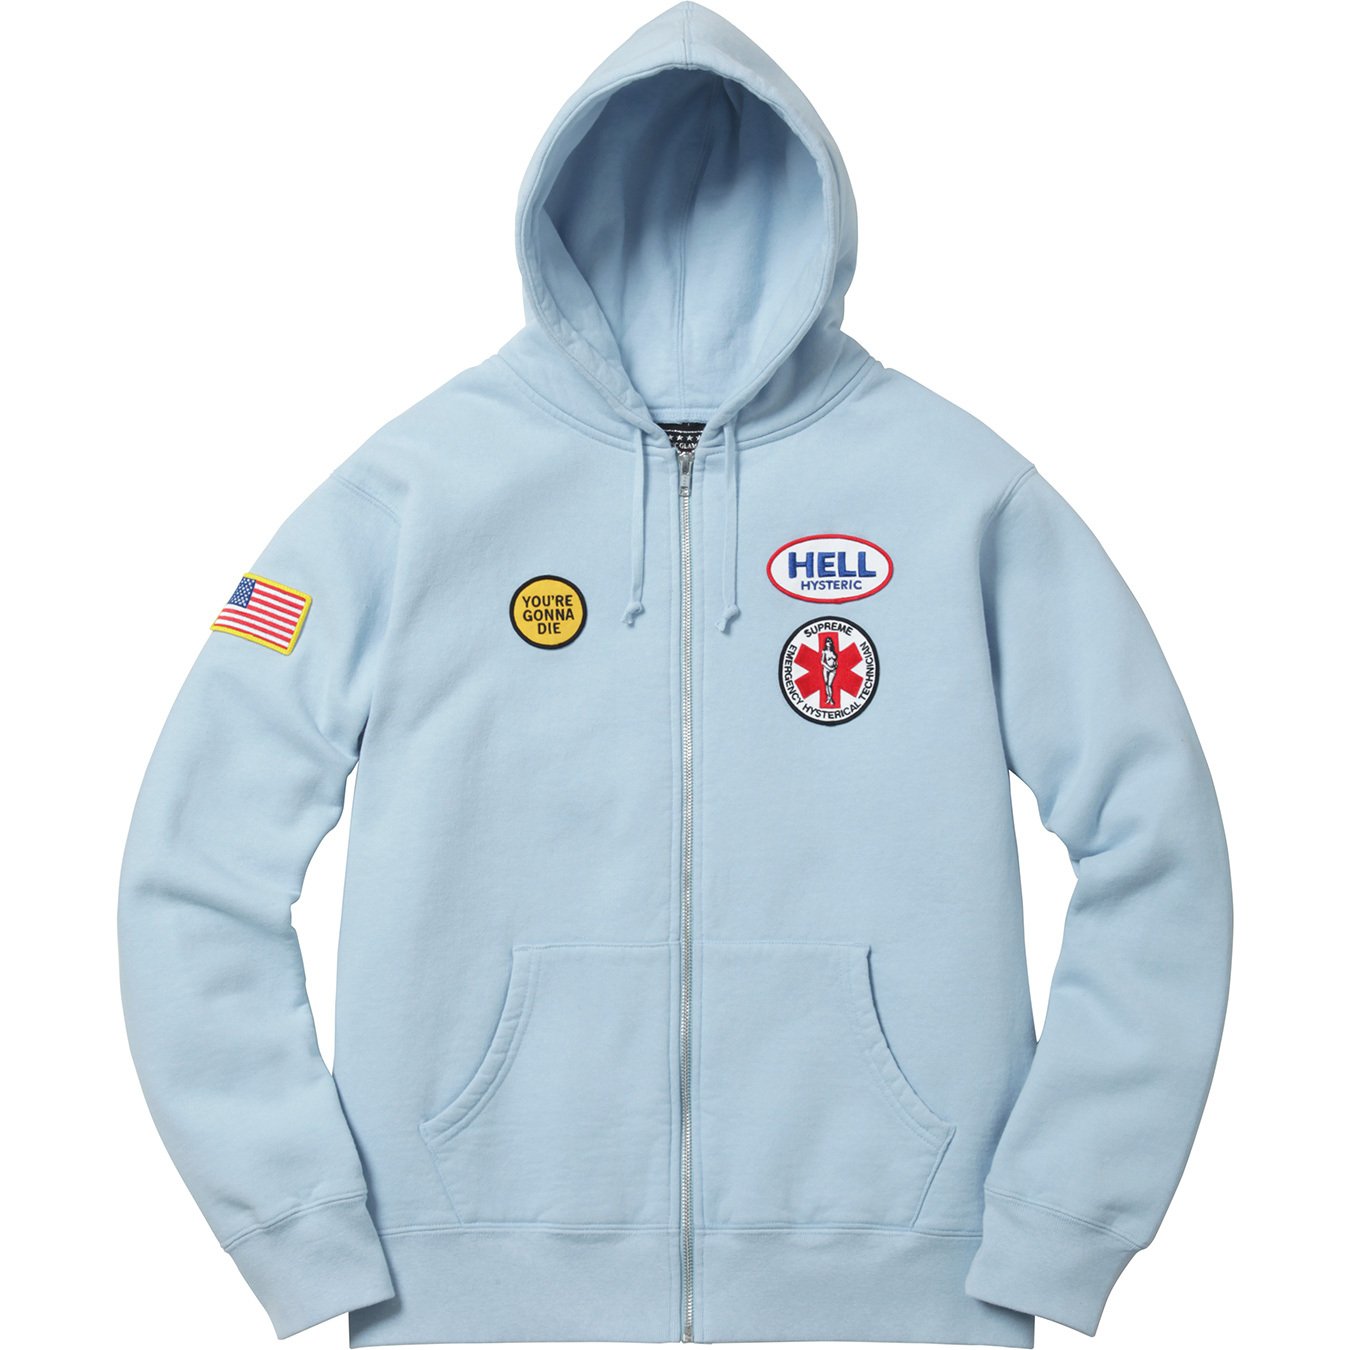 Supreme/HYSTERIC GLAMOUR Patches Zip Up Sweatshirt - Supreme Community